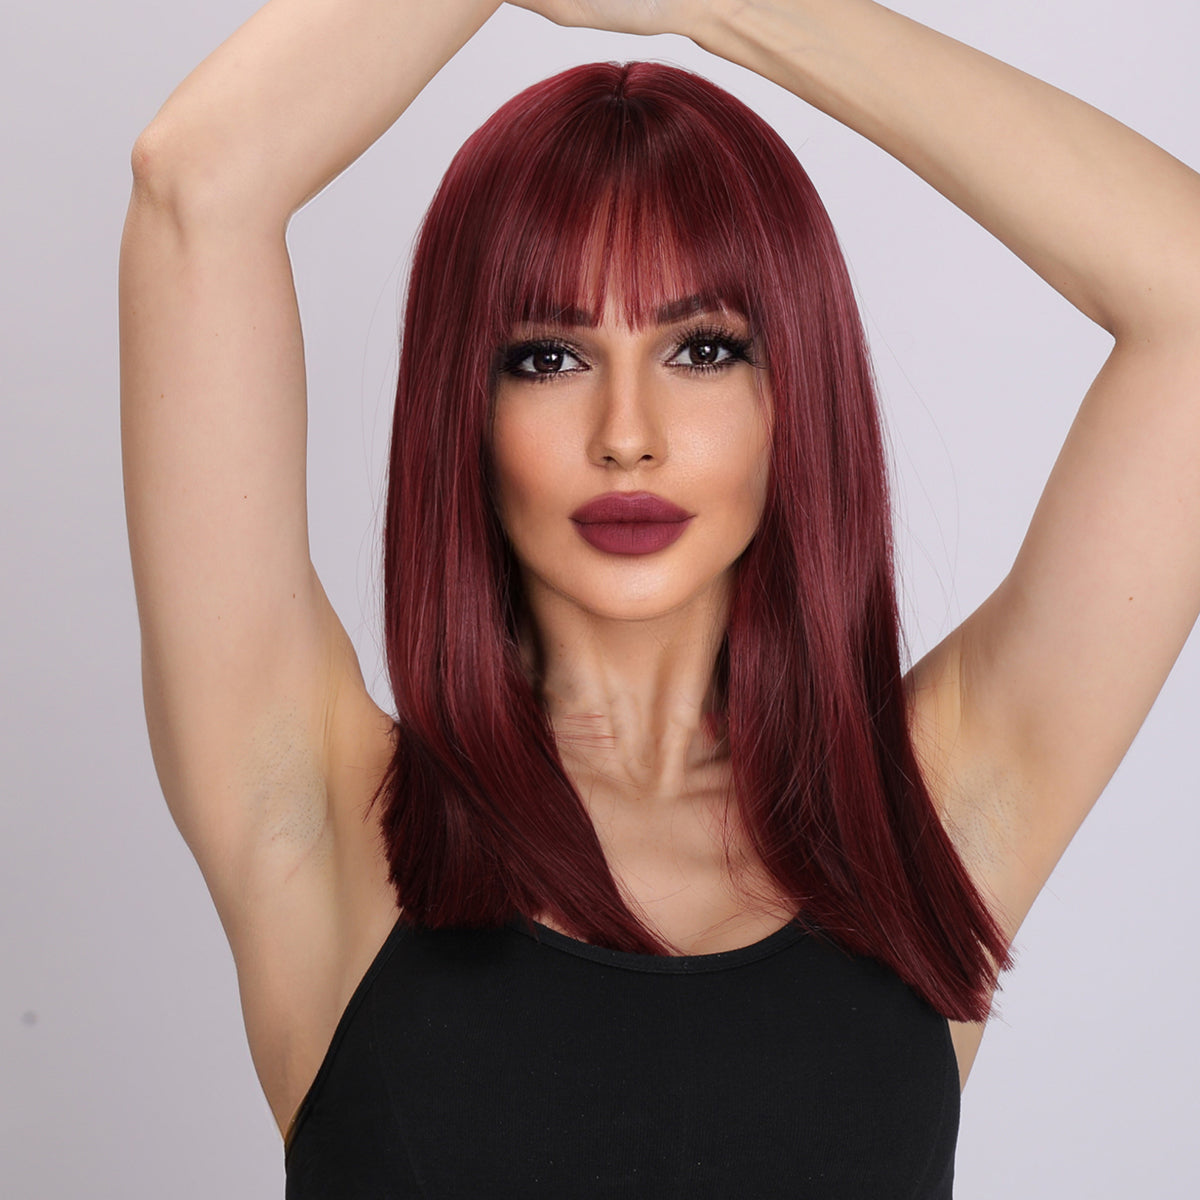 Kimberly | Wine Red Wig | Straight Hair Wig | 18 inch Wig | TM Pop